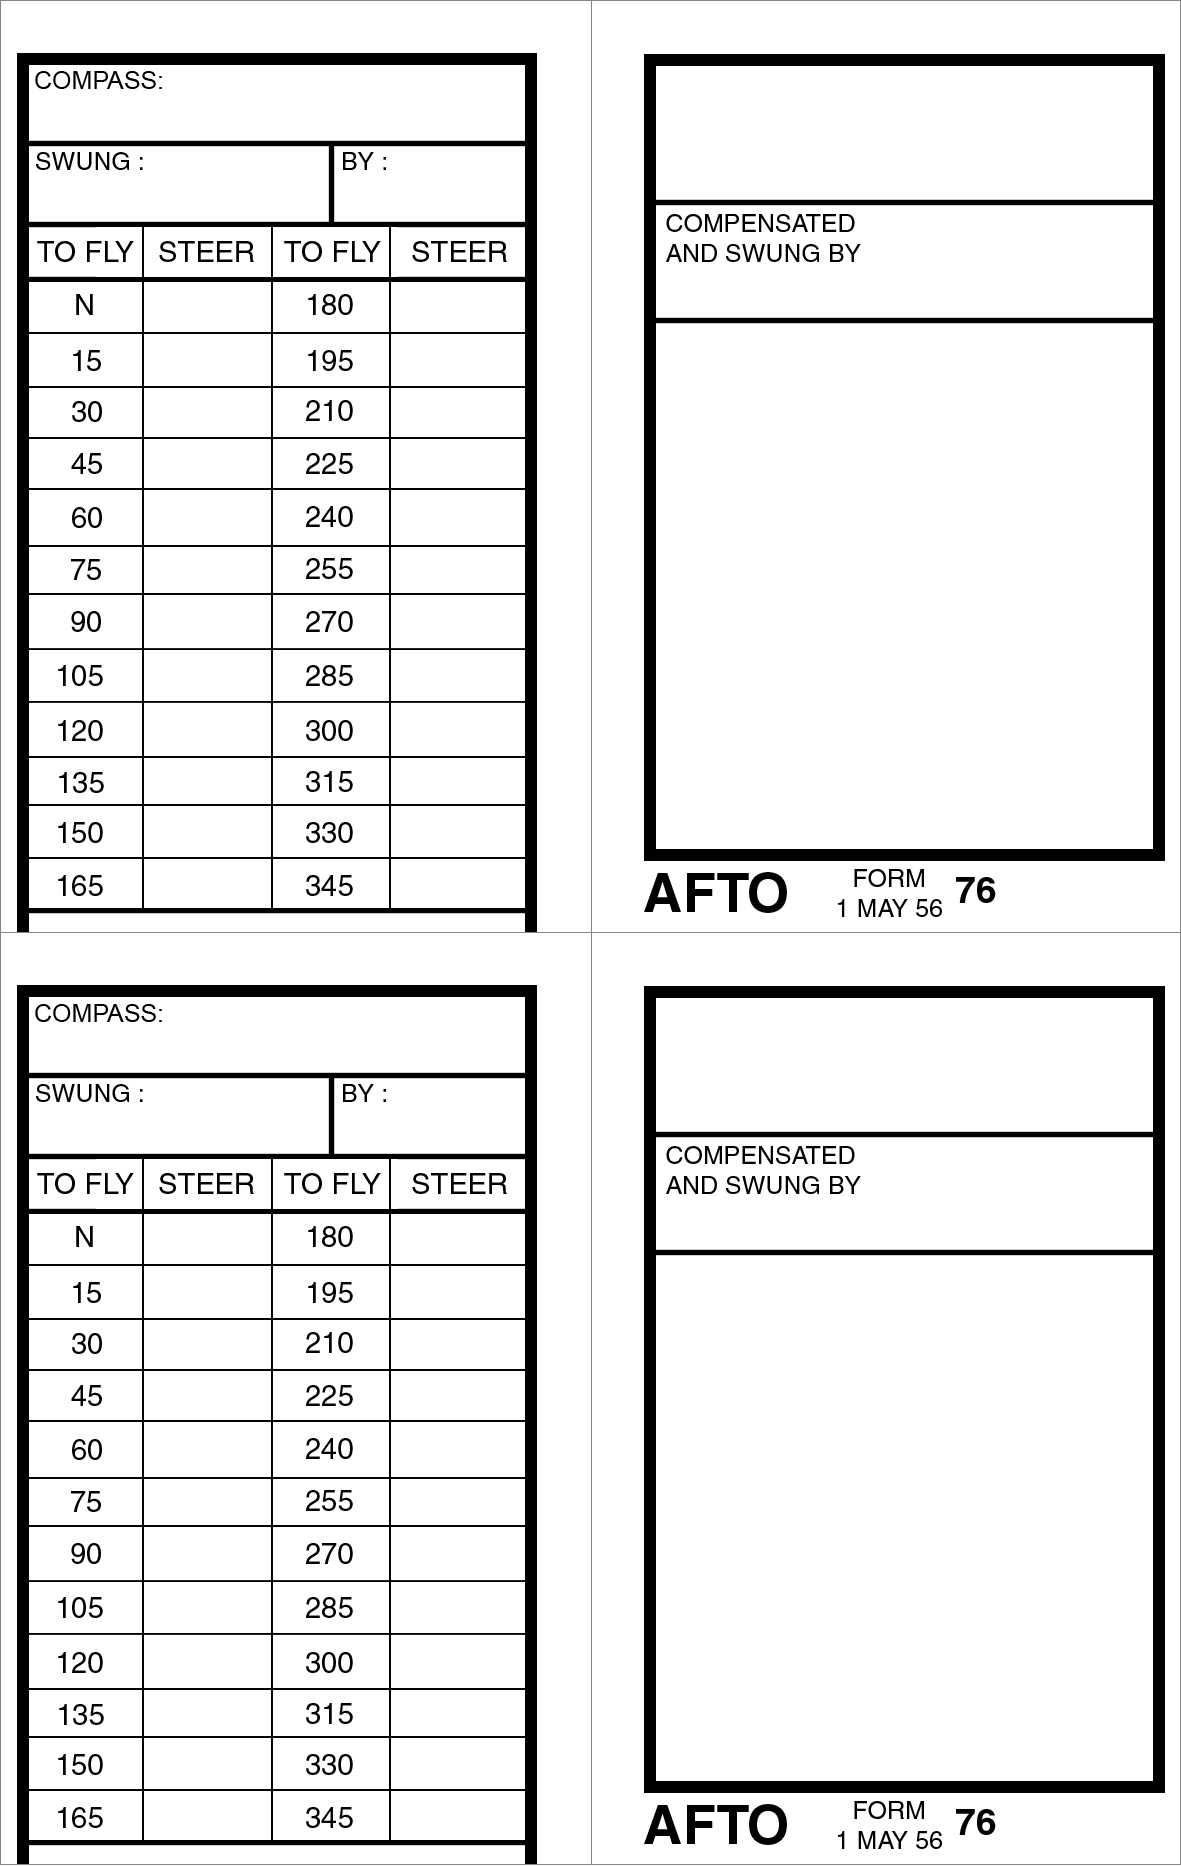 Compass Deviation Card Template ] – Can Be Found At Quot Throughout Compass Deviation Card Template